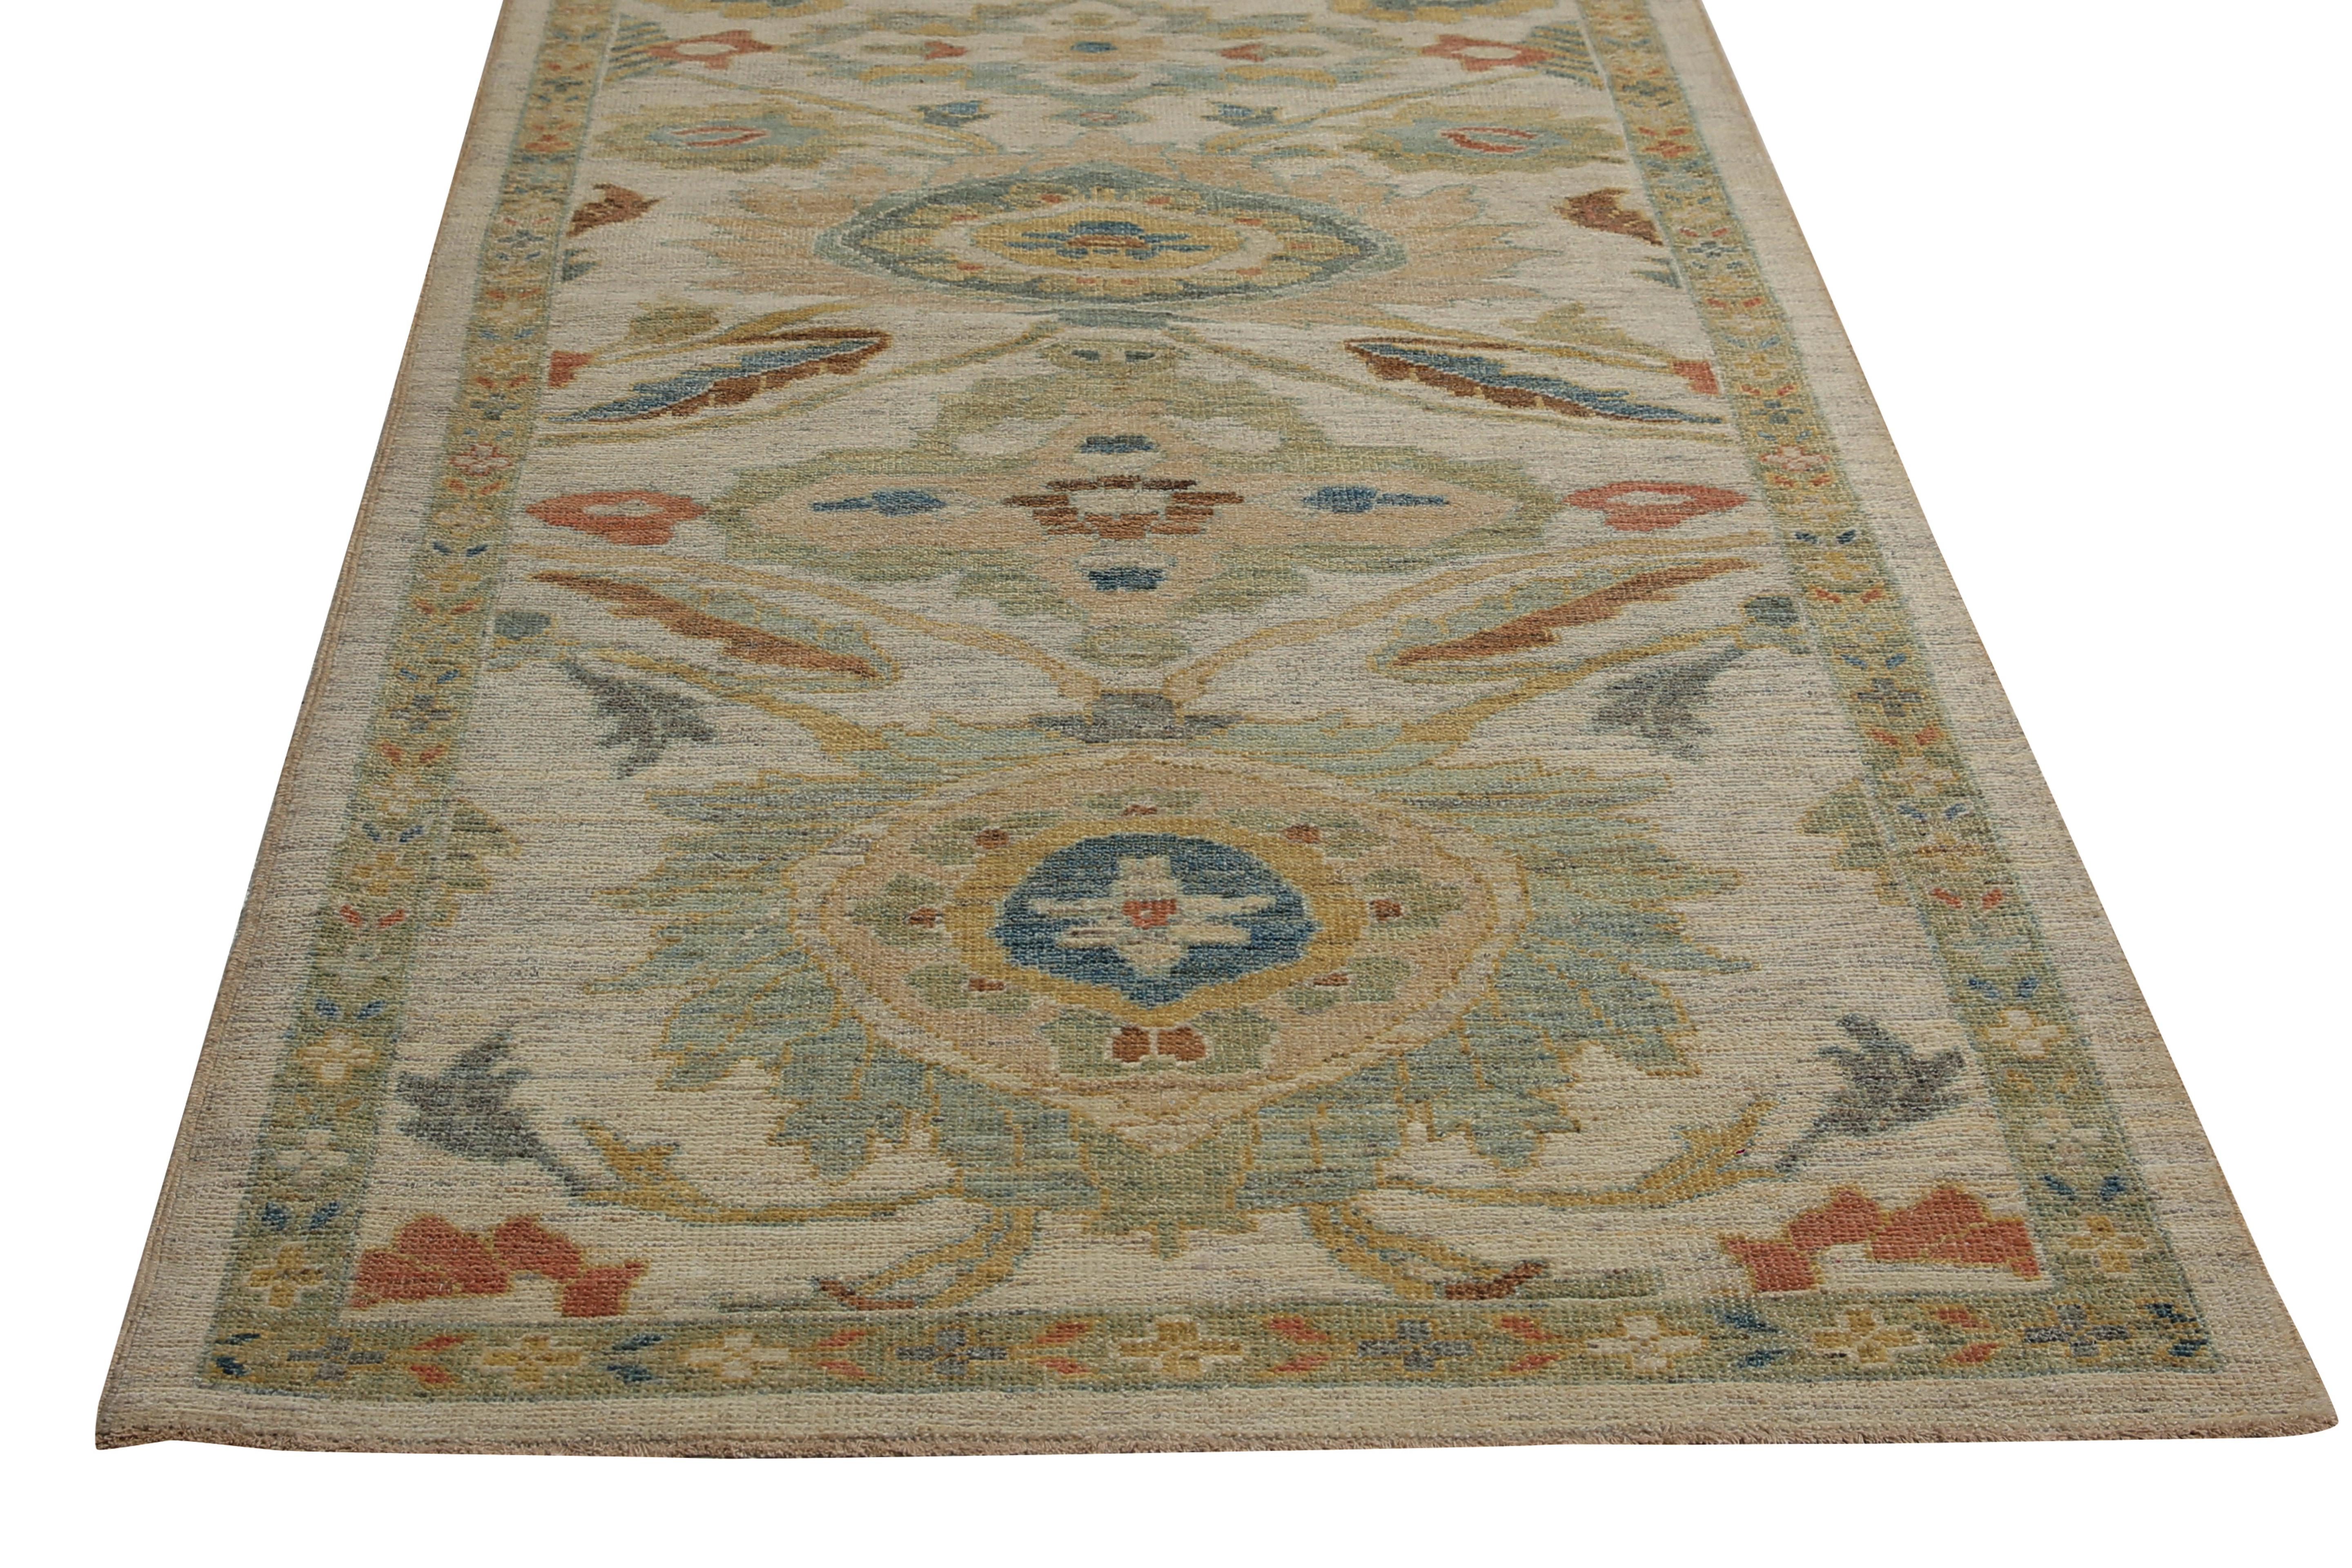 Luxurious Handmade Sultanabad Rug - Transitional Design, Blue, Orange, Green, Re For Sale 2